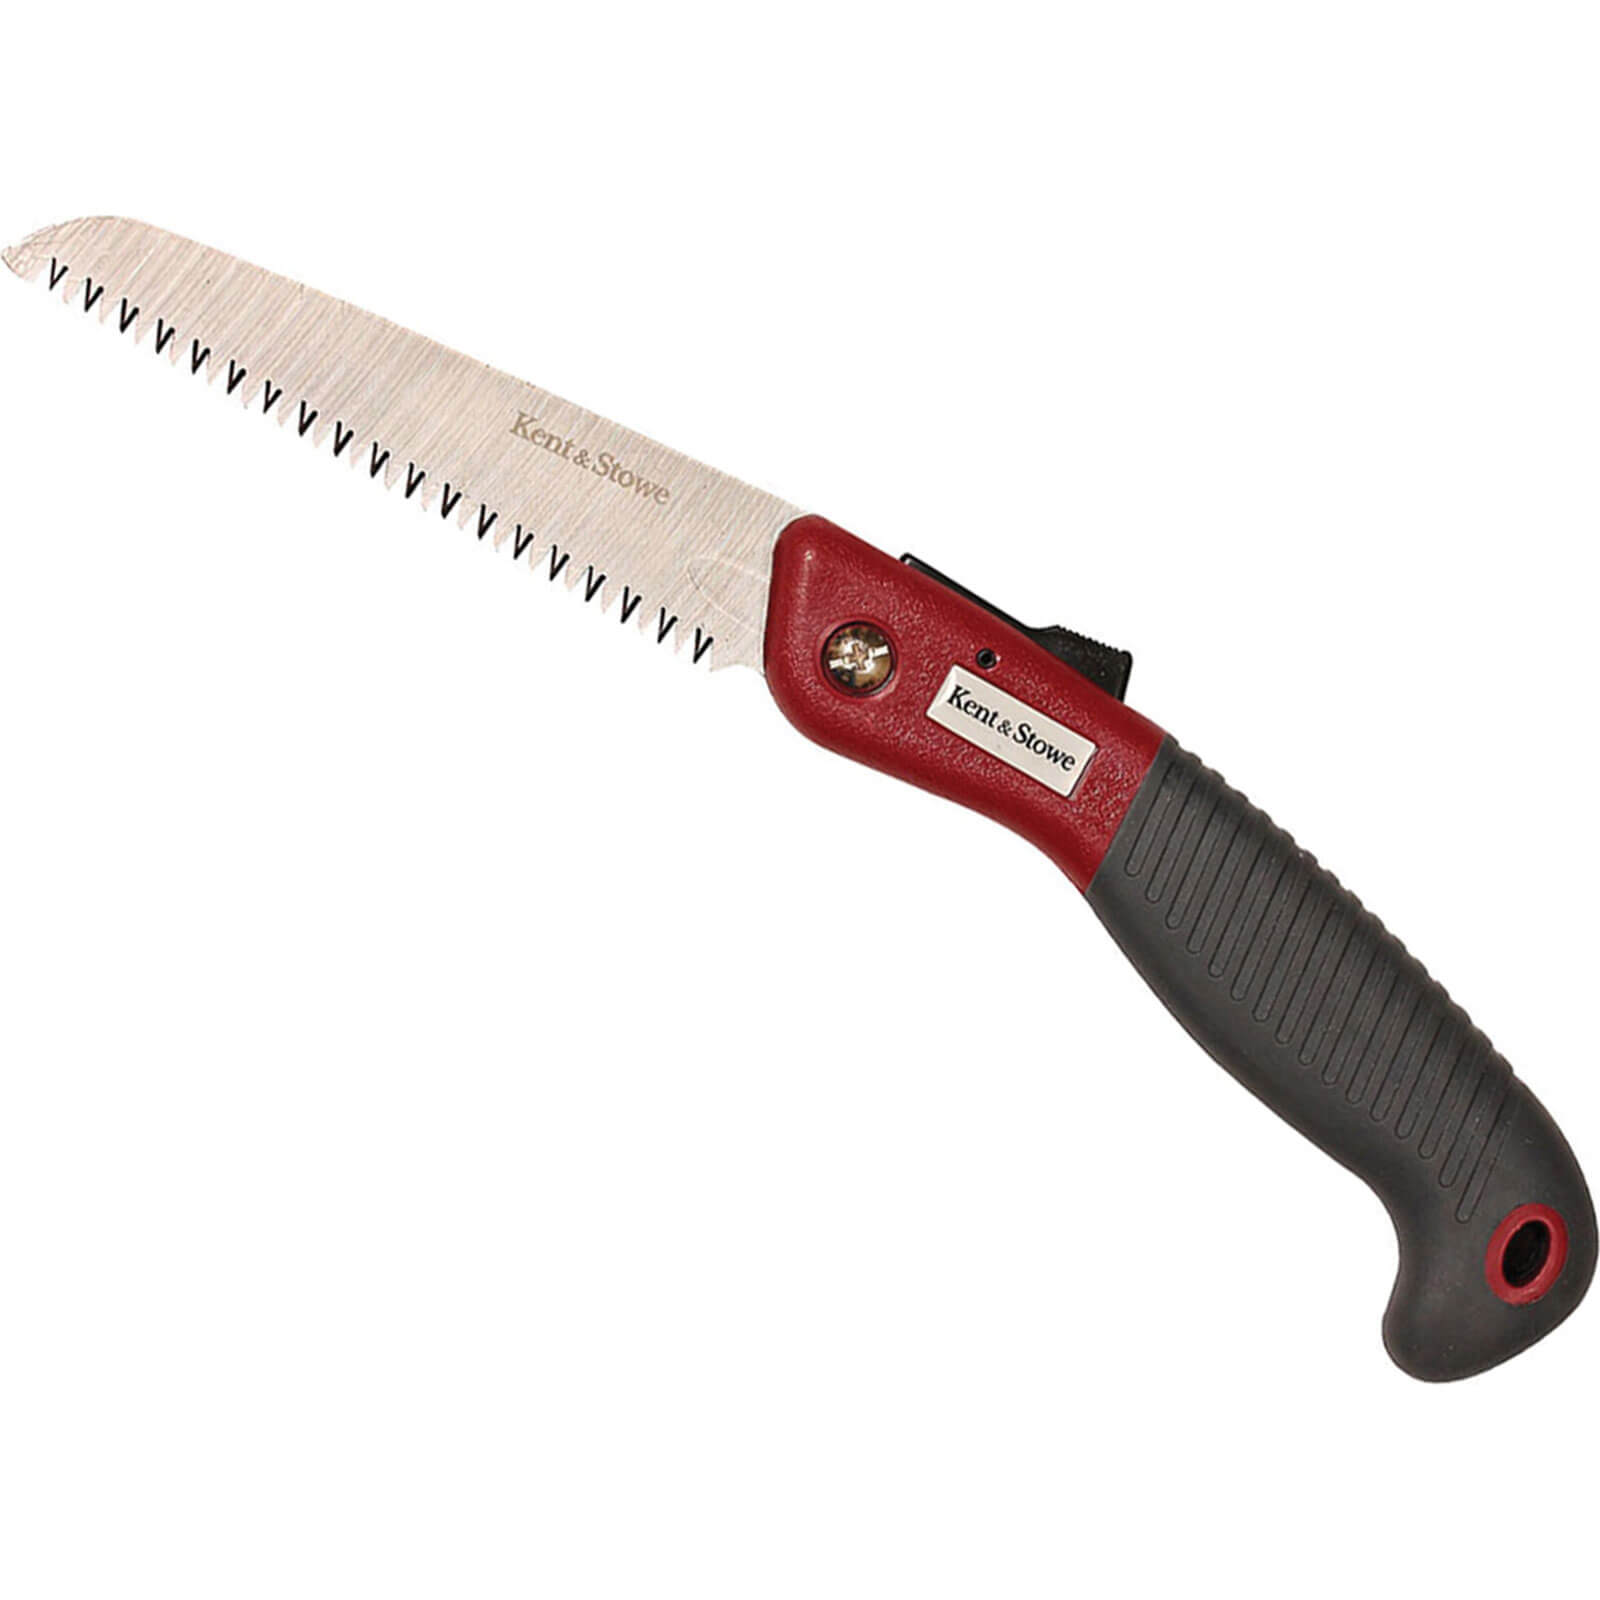 Image of Kent and Stowe Turbo Folding Carbon Steel Pruning Saw